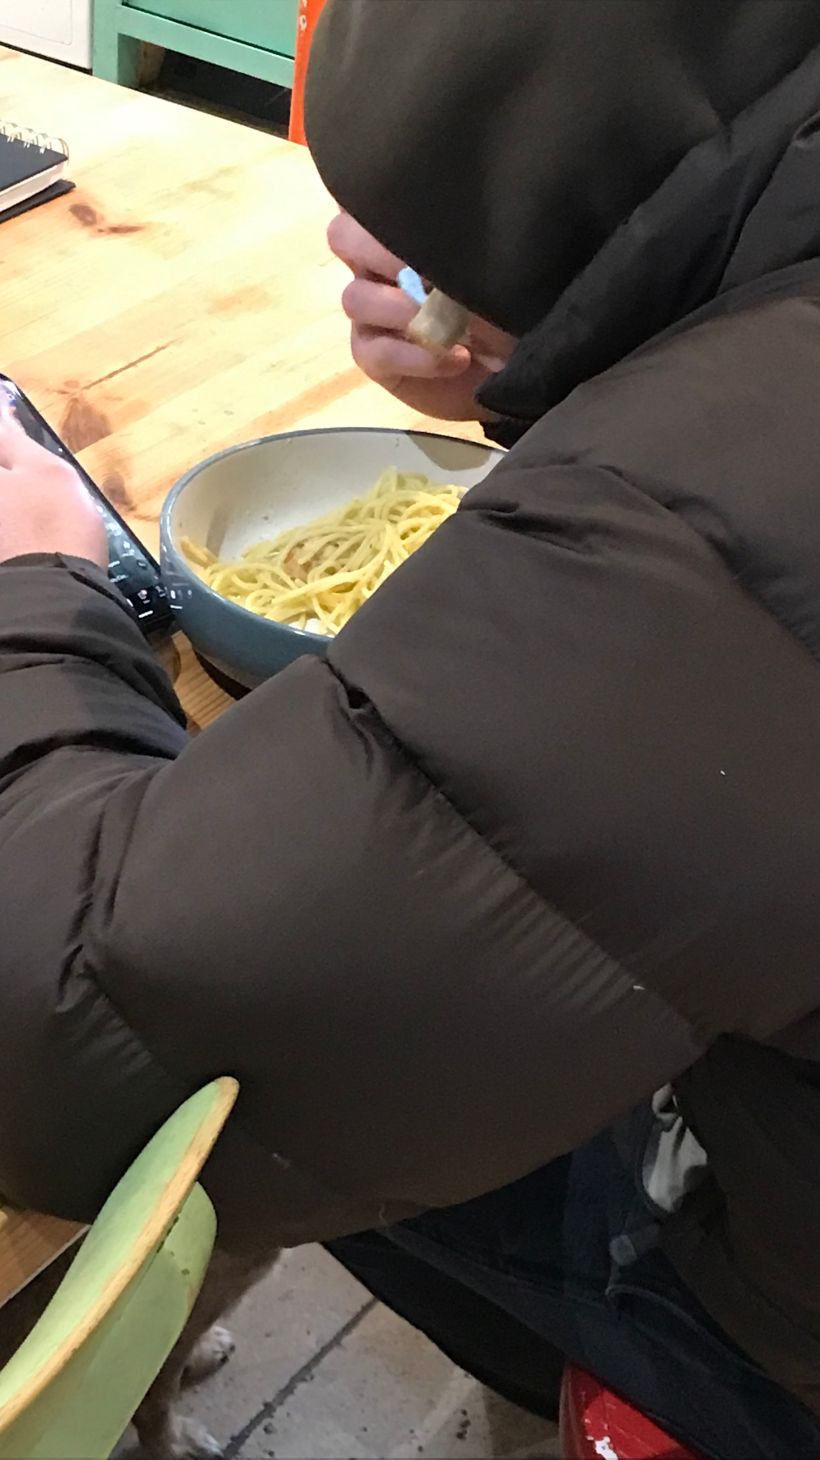 A person in a coat eating pasta